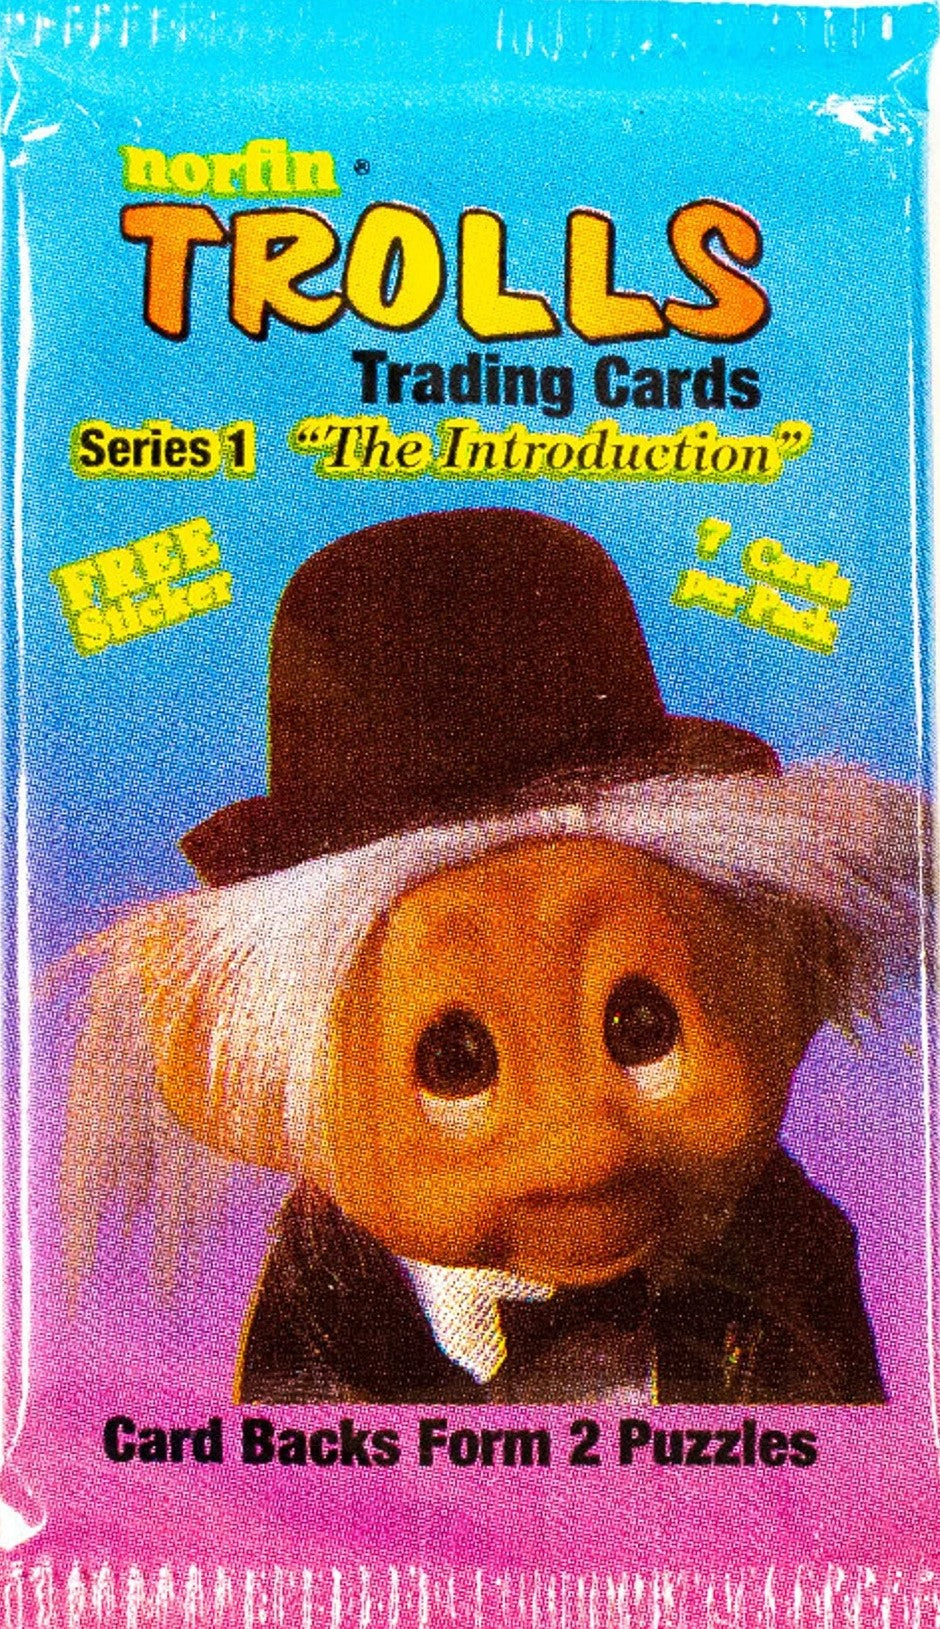 1992 NORFIN TROLLS - SERIES 2- 7 cards AND 1 STICKER PER PACK.